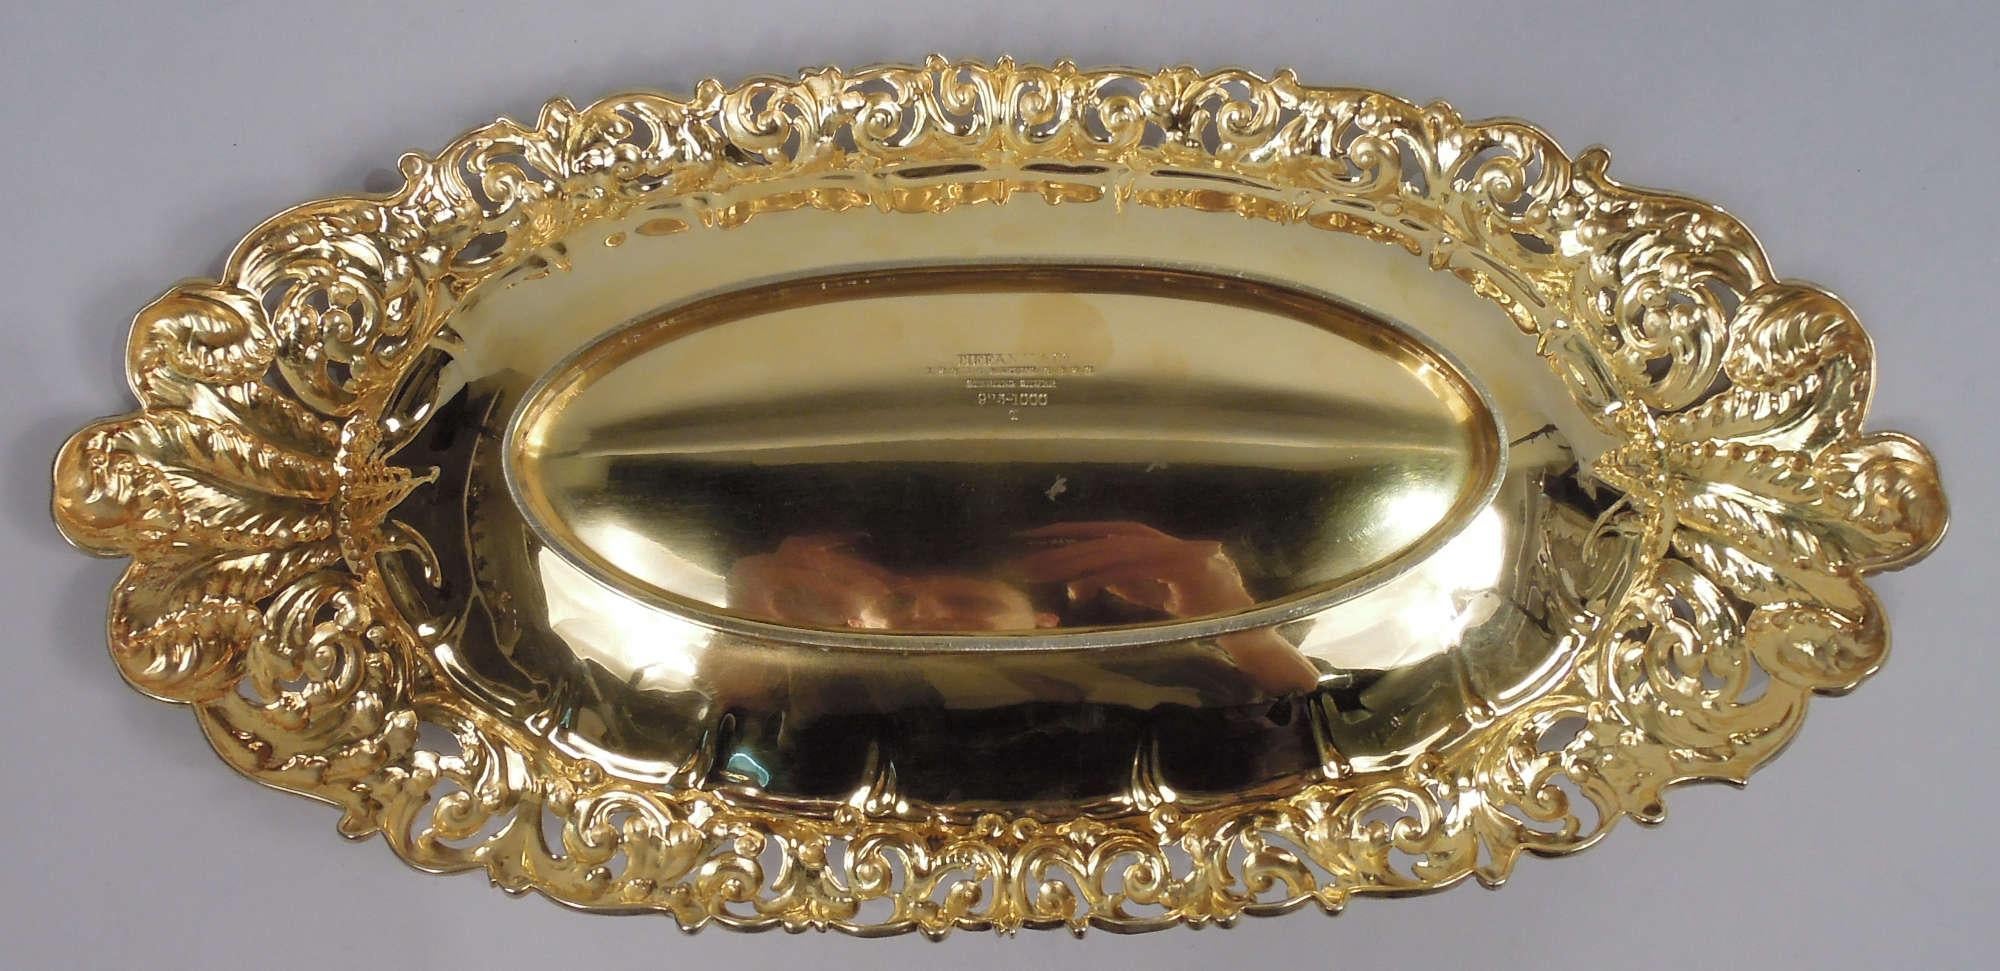 19th Century Pair of Tiffany Silver Gilt Bread Trays with Prince of Wales Feathers For Sale